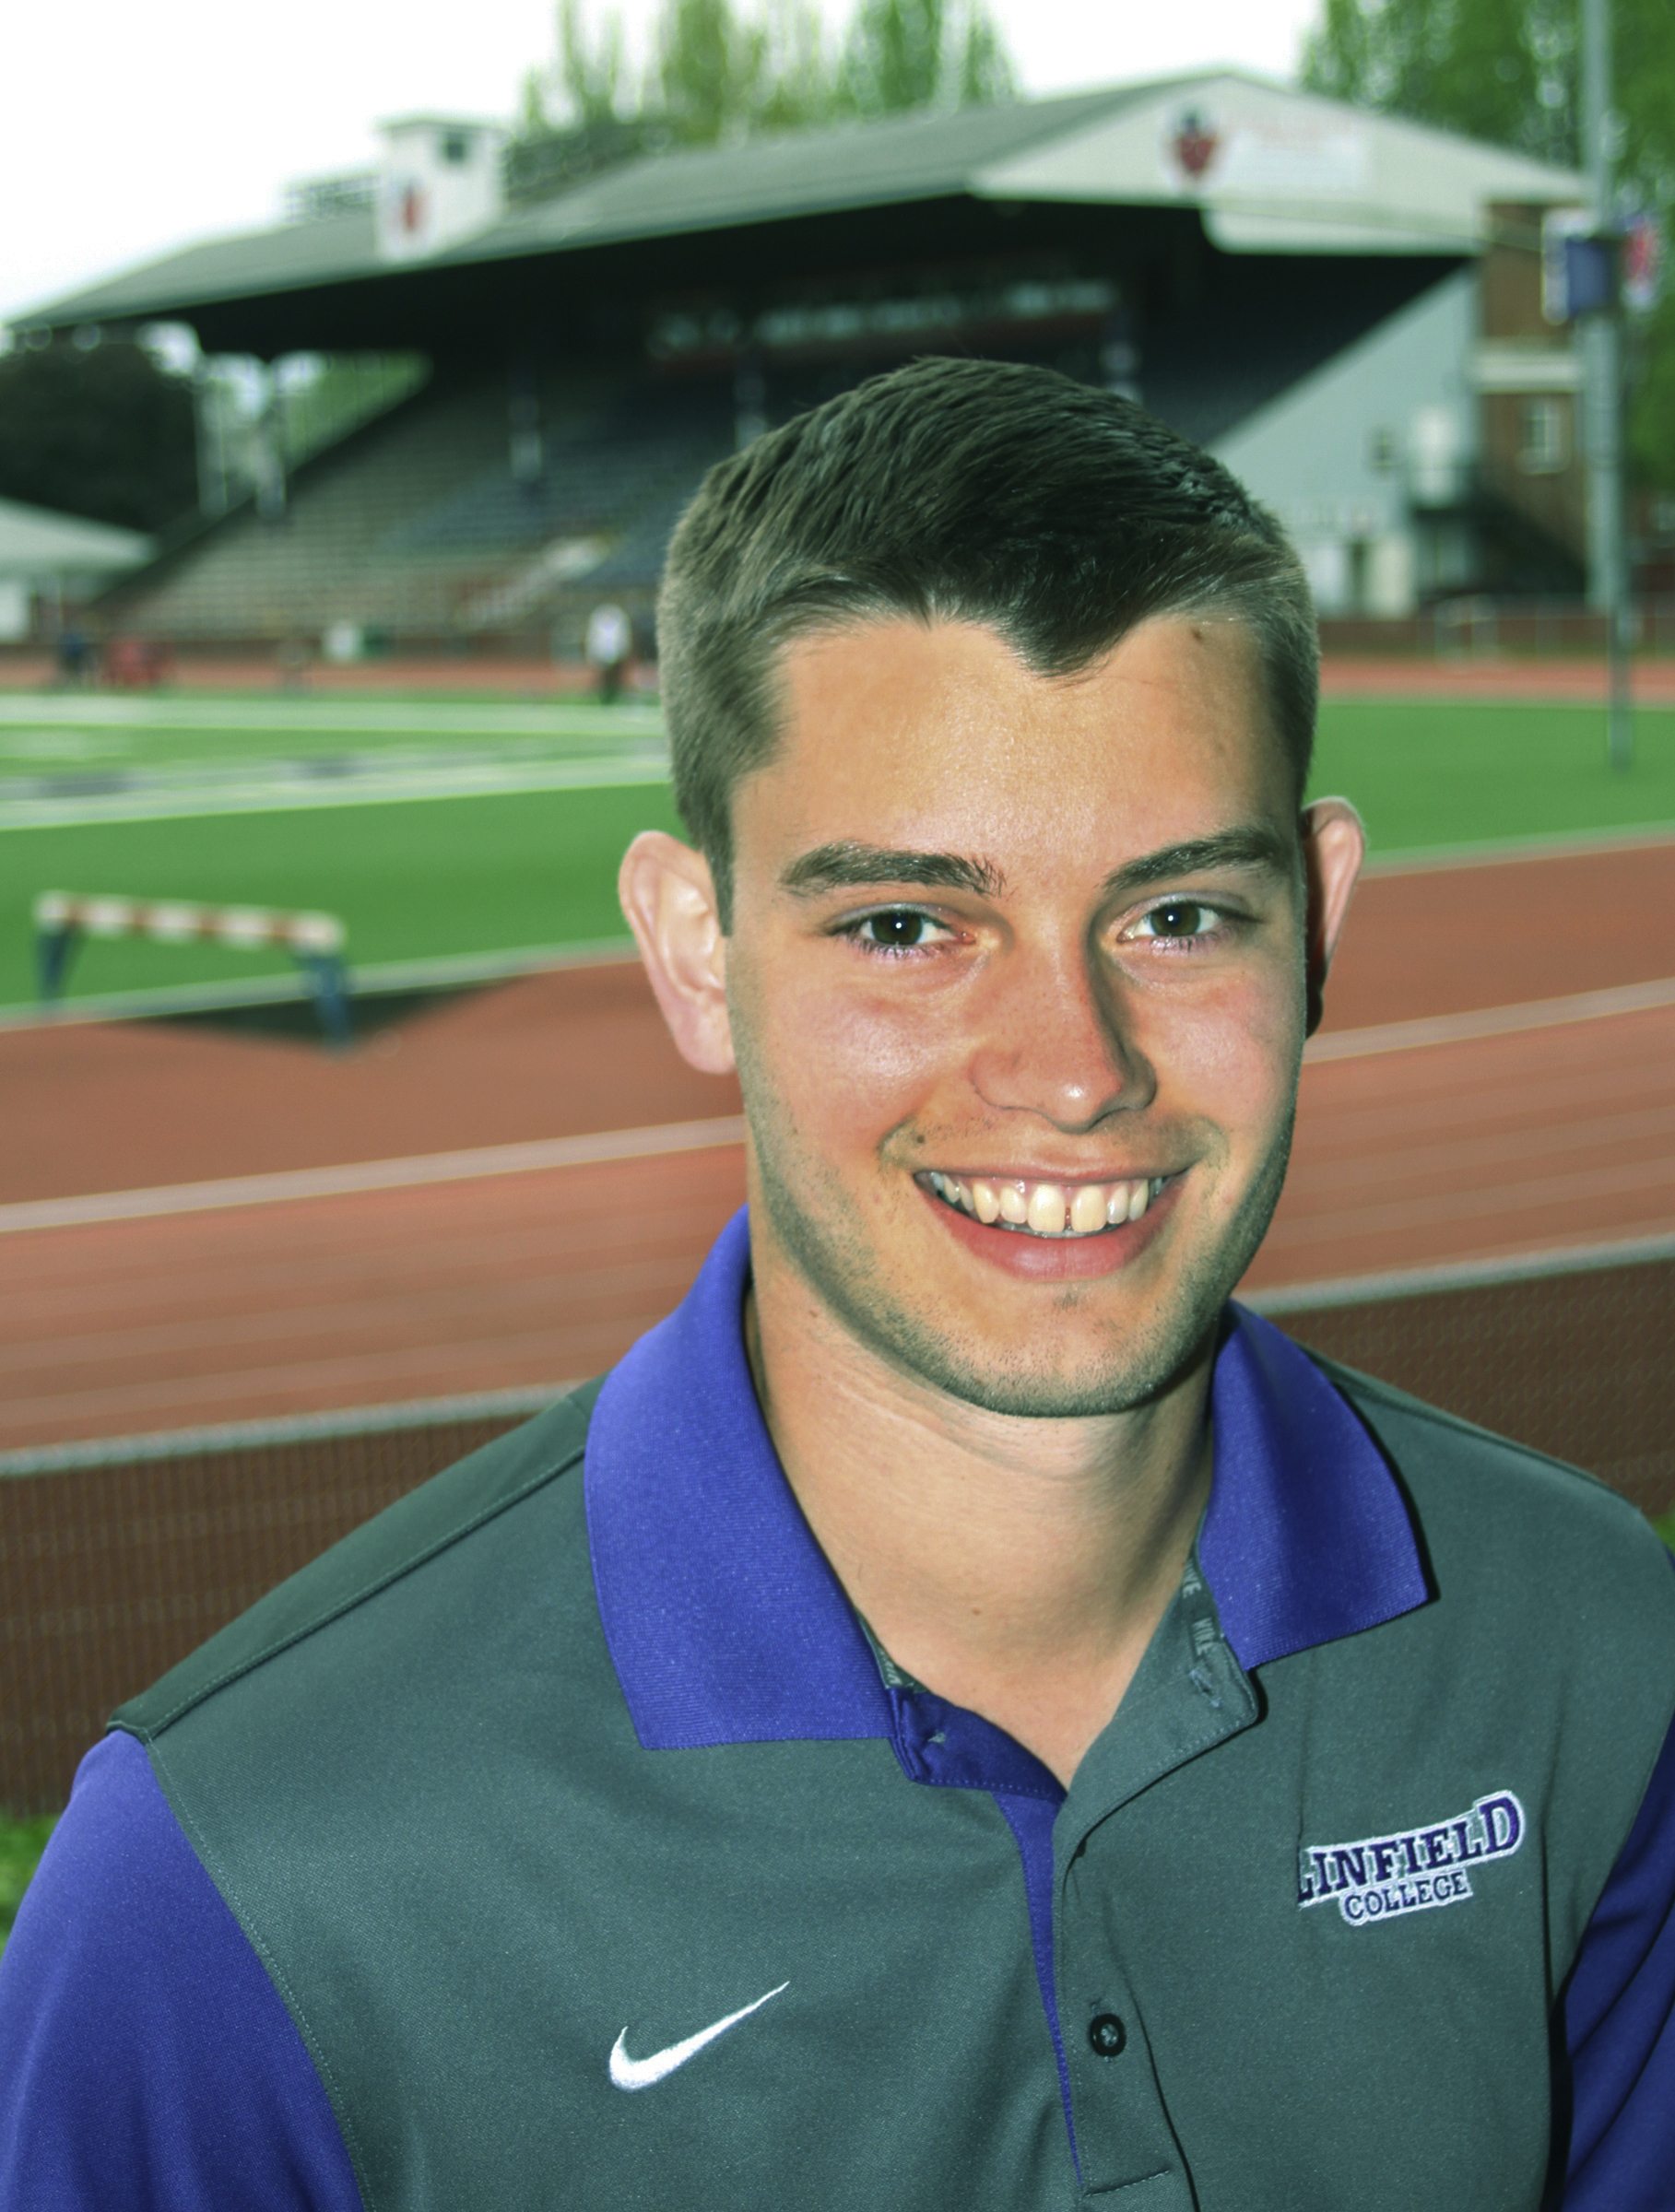 Kevin Nelson has found his sporting niche in the broadcast booth as the voice of Linfield College.